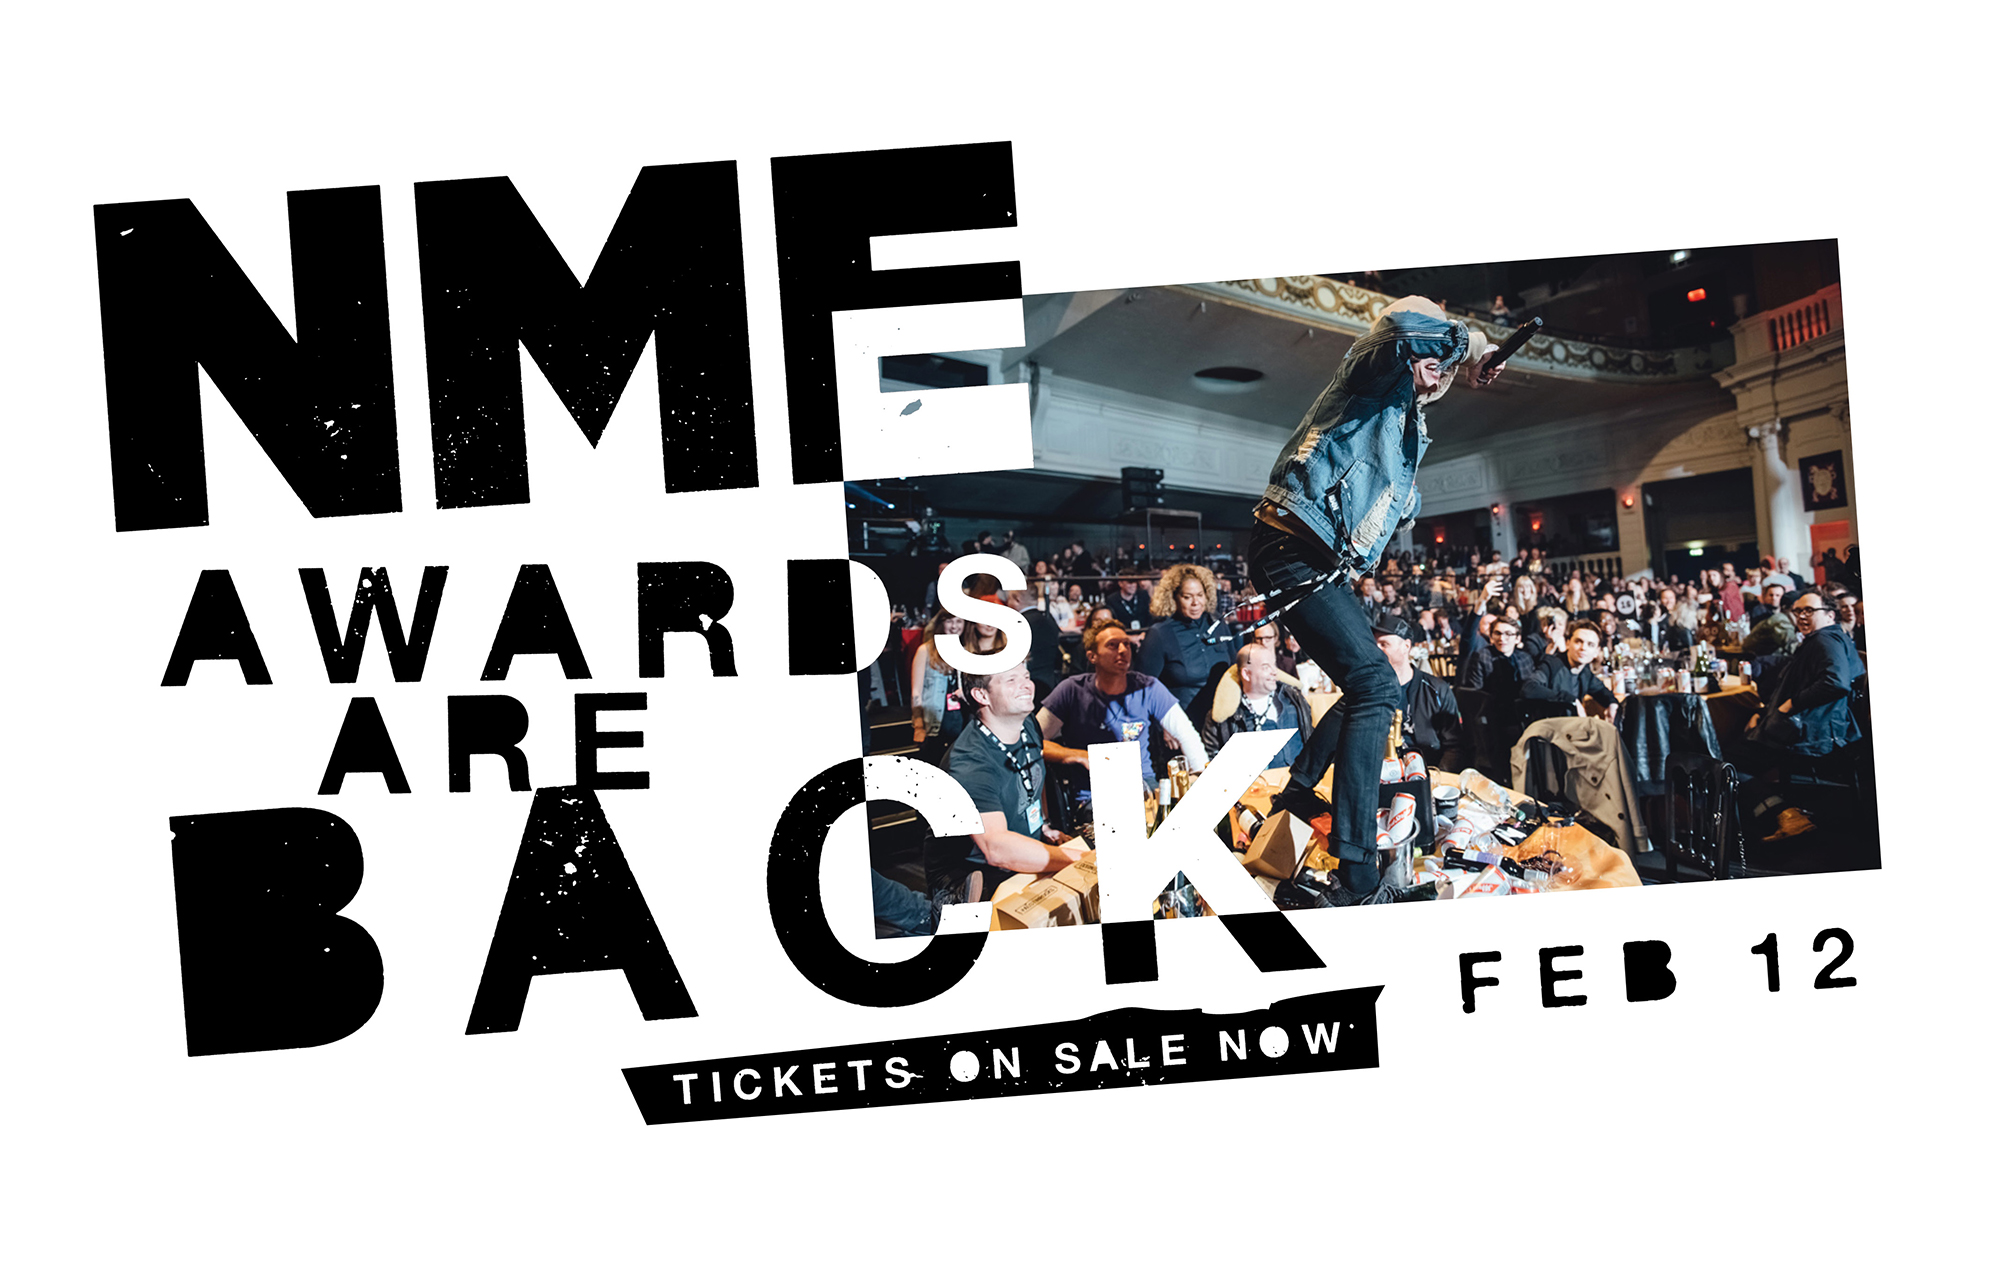 Tickets to the NME Awards 2020 are on sale now - www.nme.com